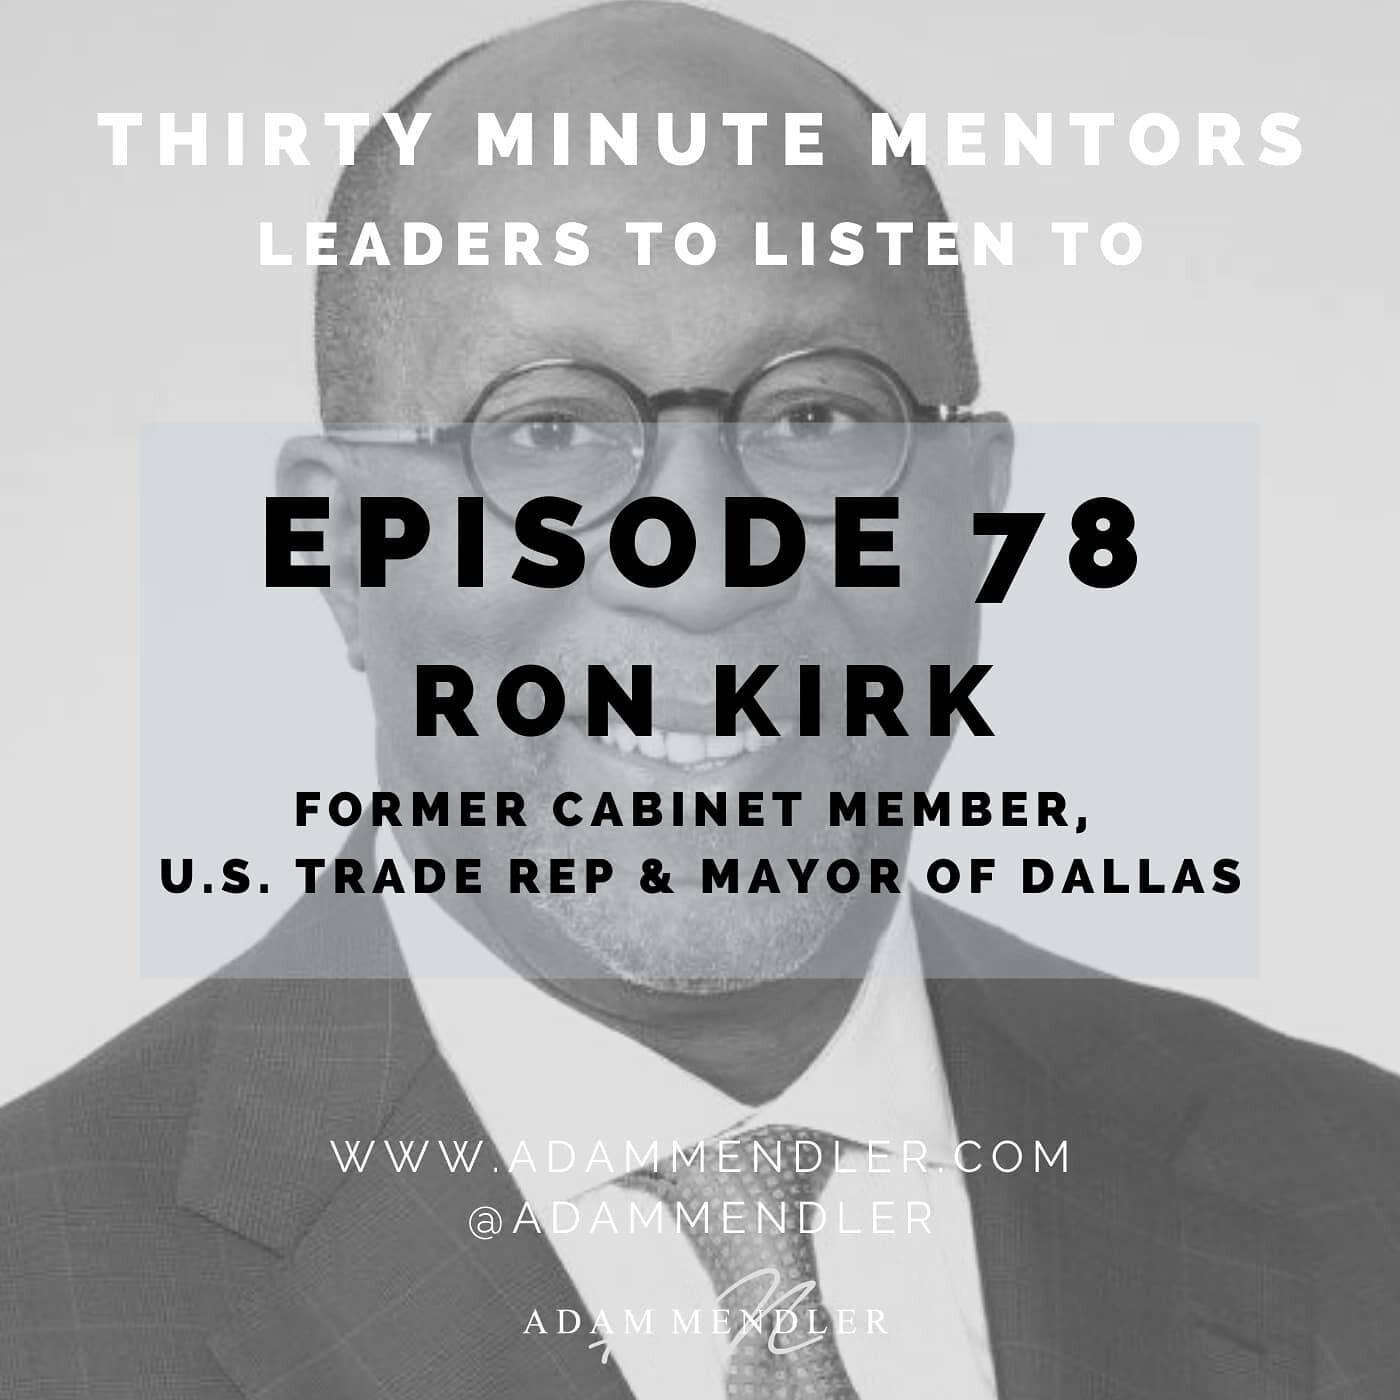 Ambassador Ron Kirk served as a Cabinet member in the Obama administration and was the first African American U.S. Trade Rep and the first African American mayor of Dallas. Ambassador Kirk joined me on Episode 78 of Thirty Minute Mentors to share his